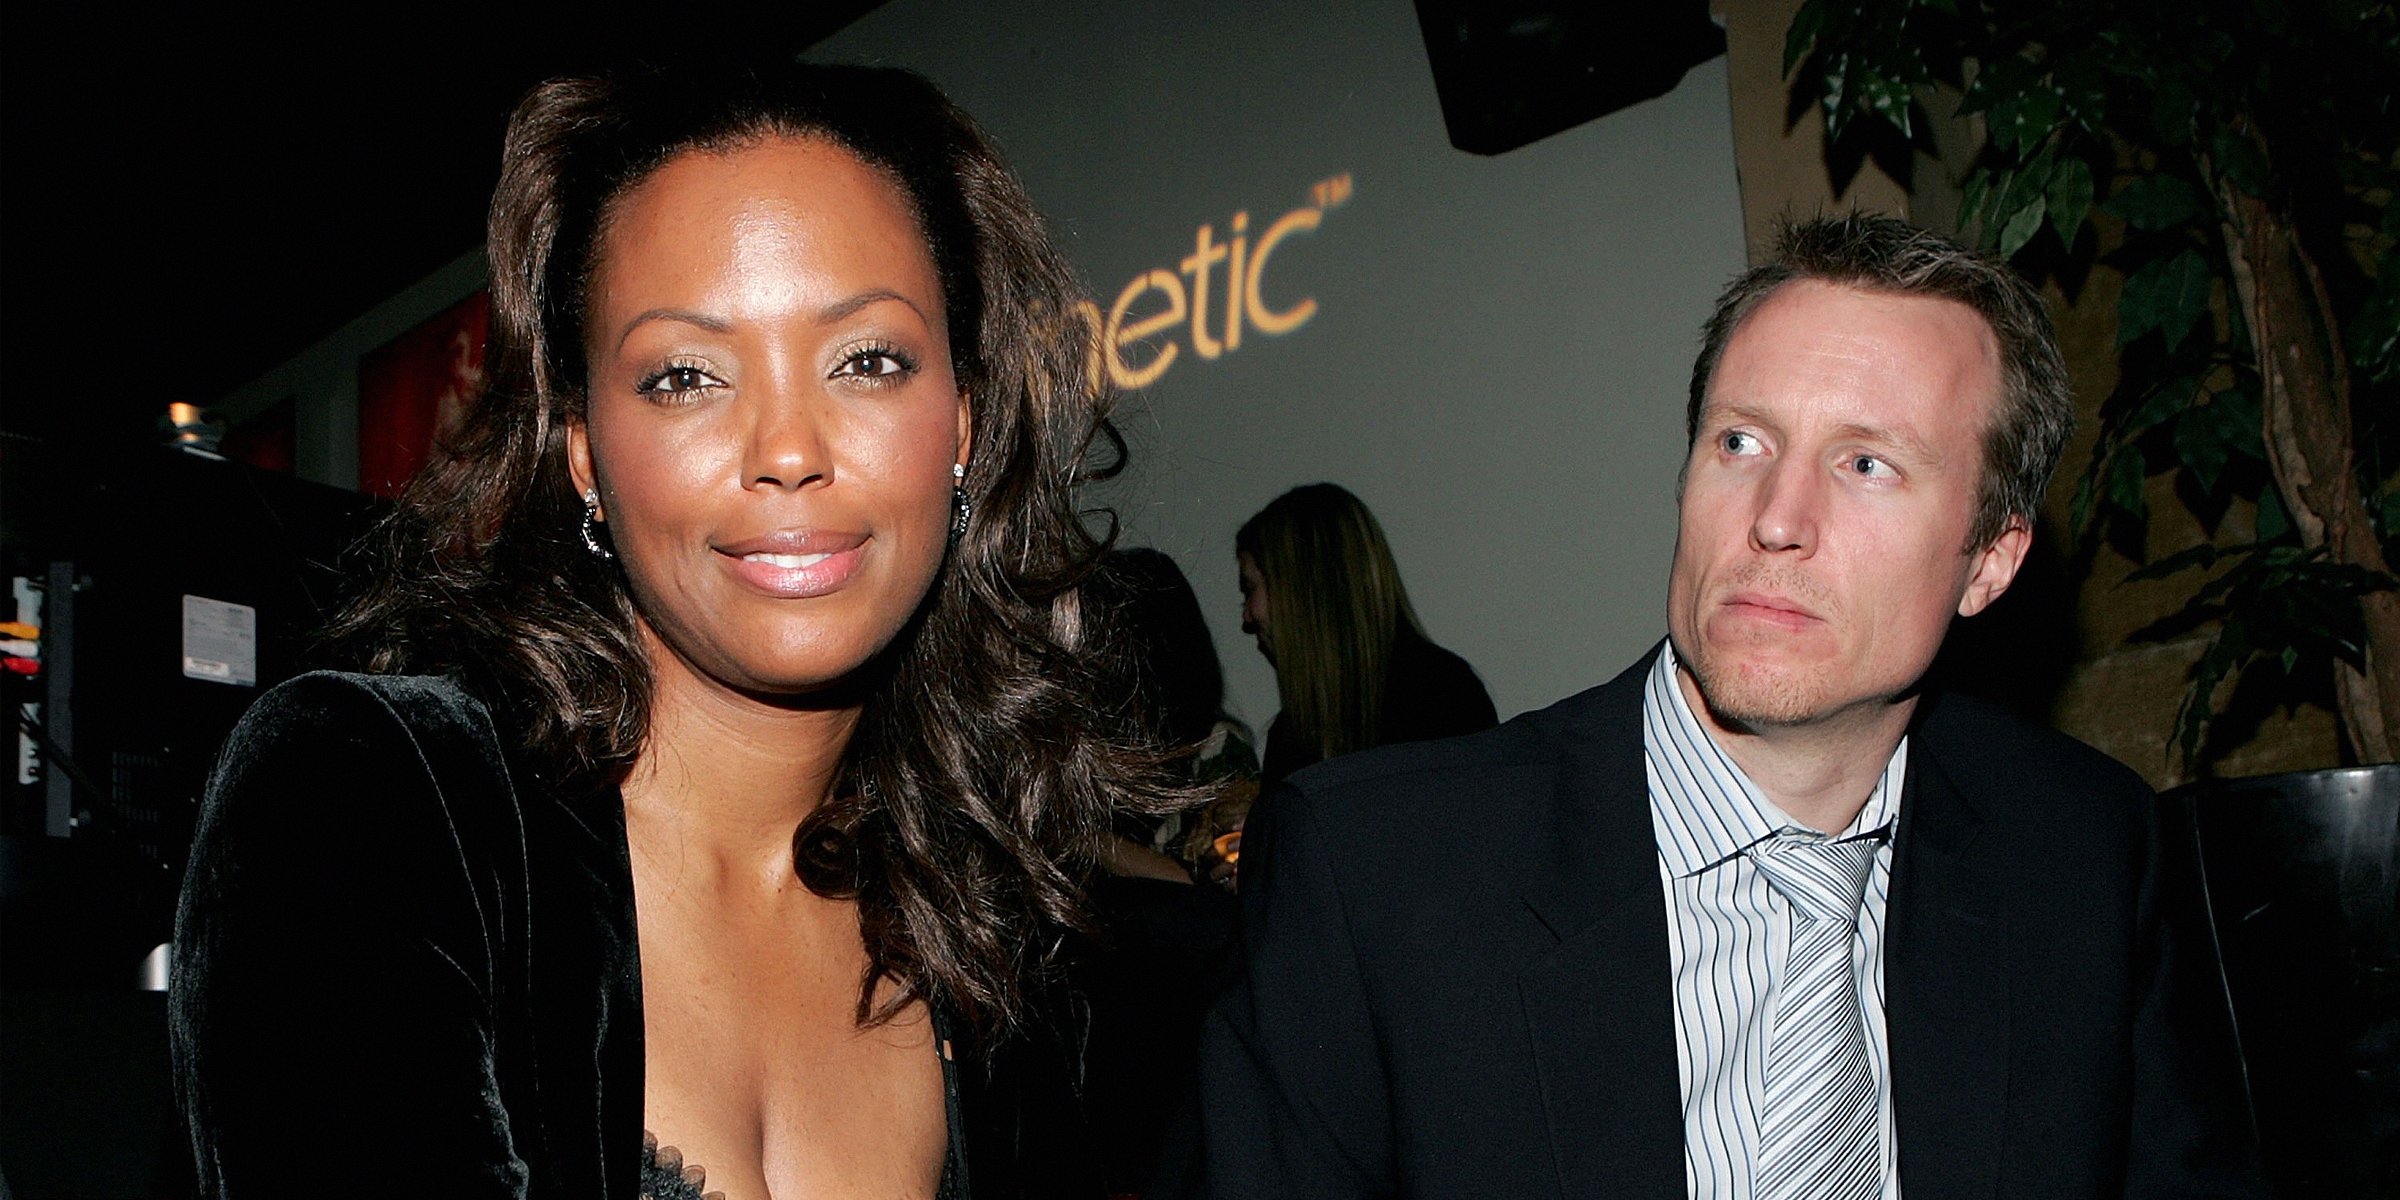 Actress Aisha Tyler and Jeff Tietjens | Source: Getty Images